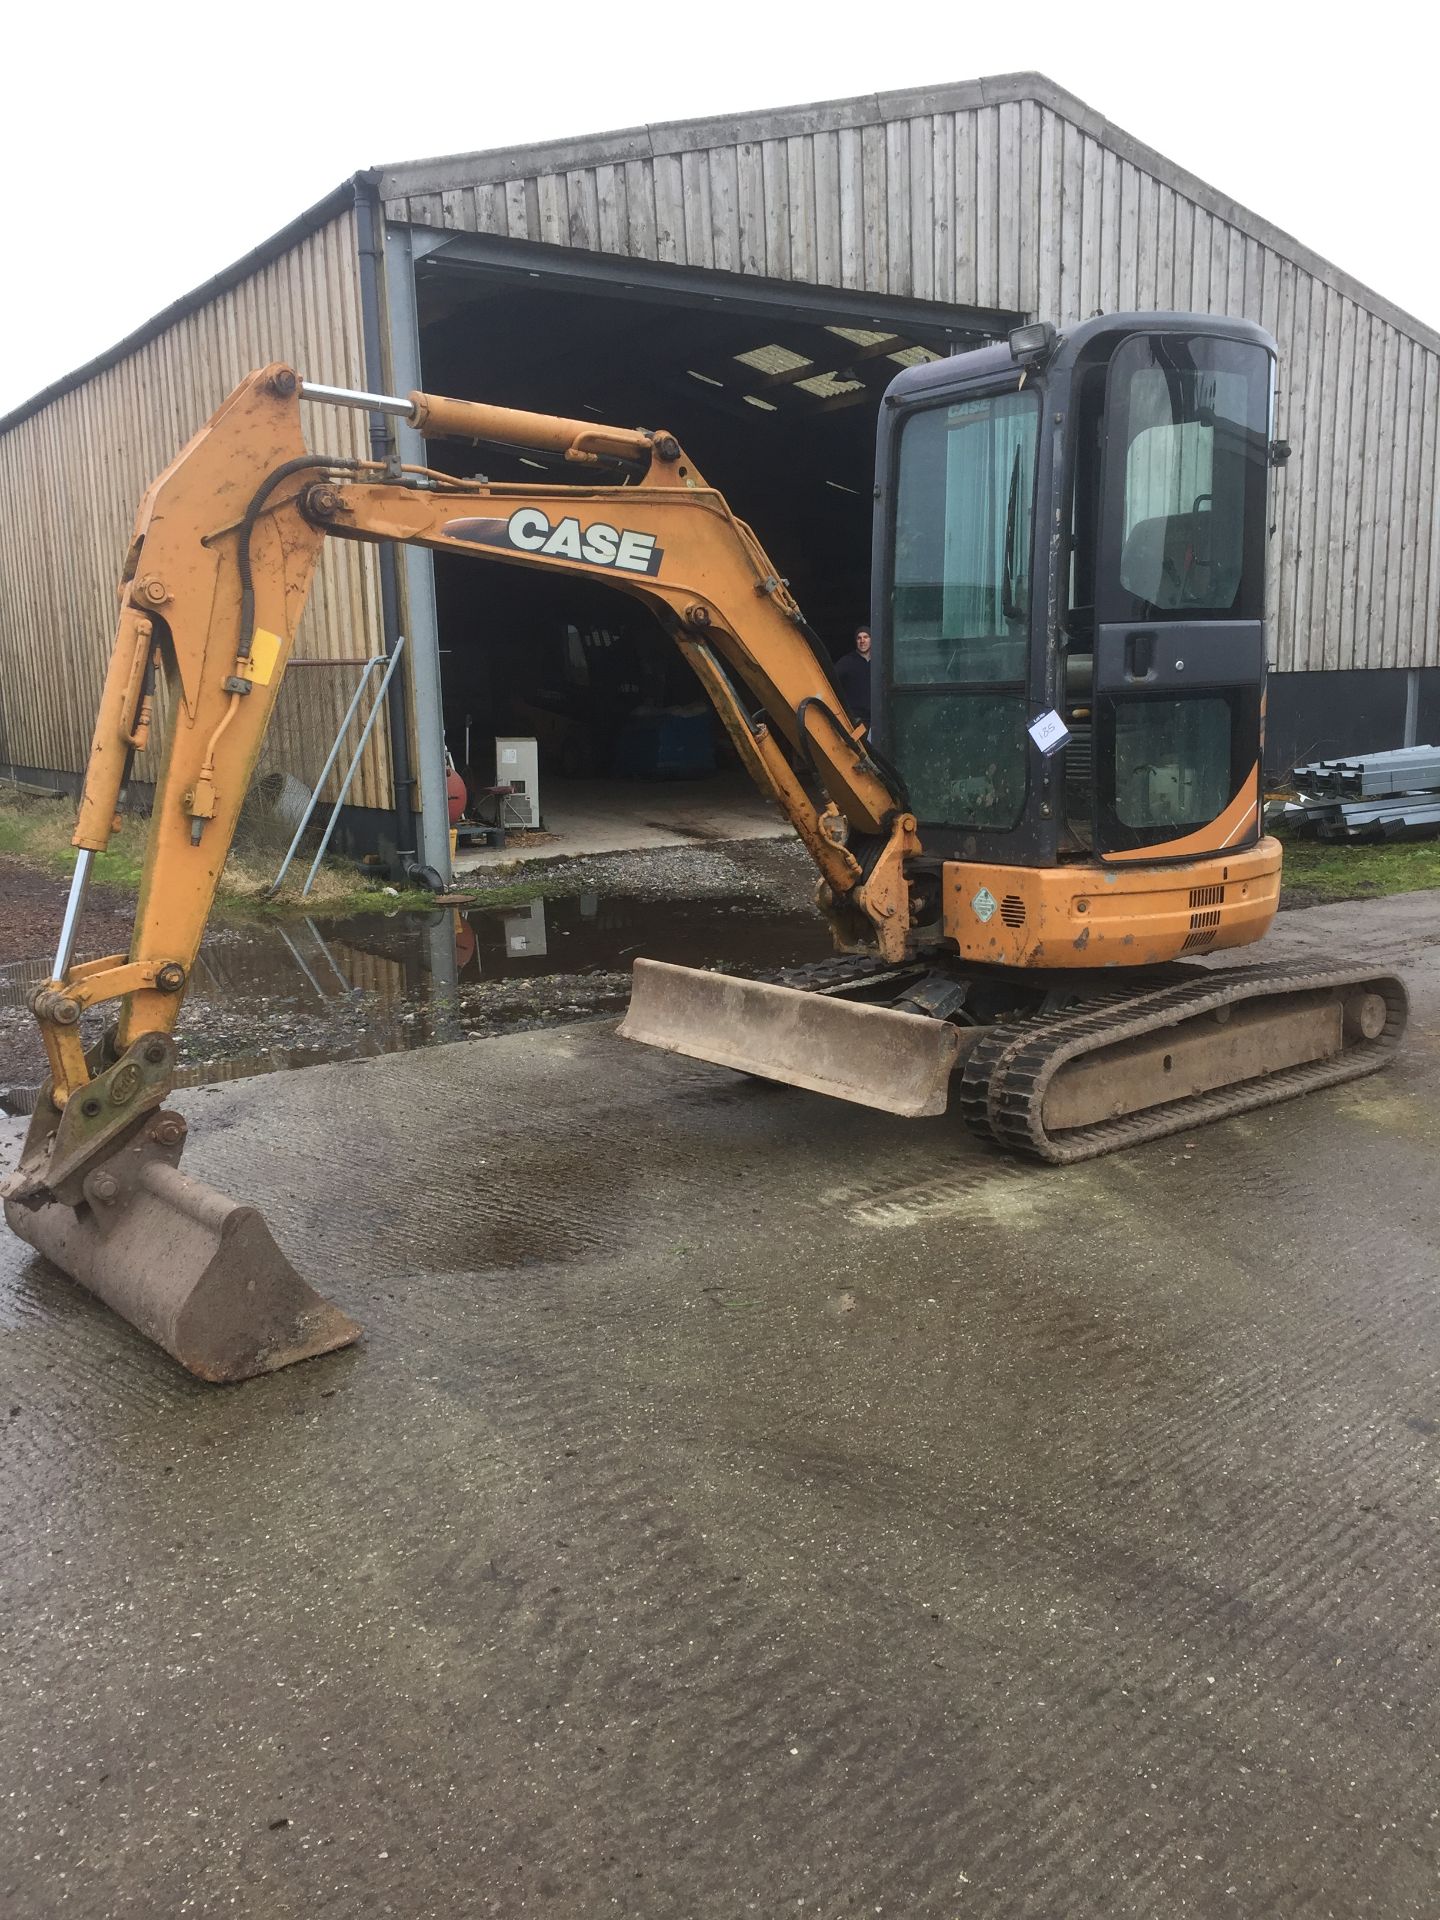 Case CX27B mini excavator, Serial No. PV10-27398 (2005) with rubber tracks, 15.9kw engine, 4' bucket